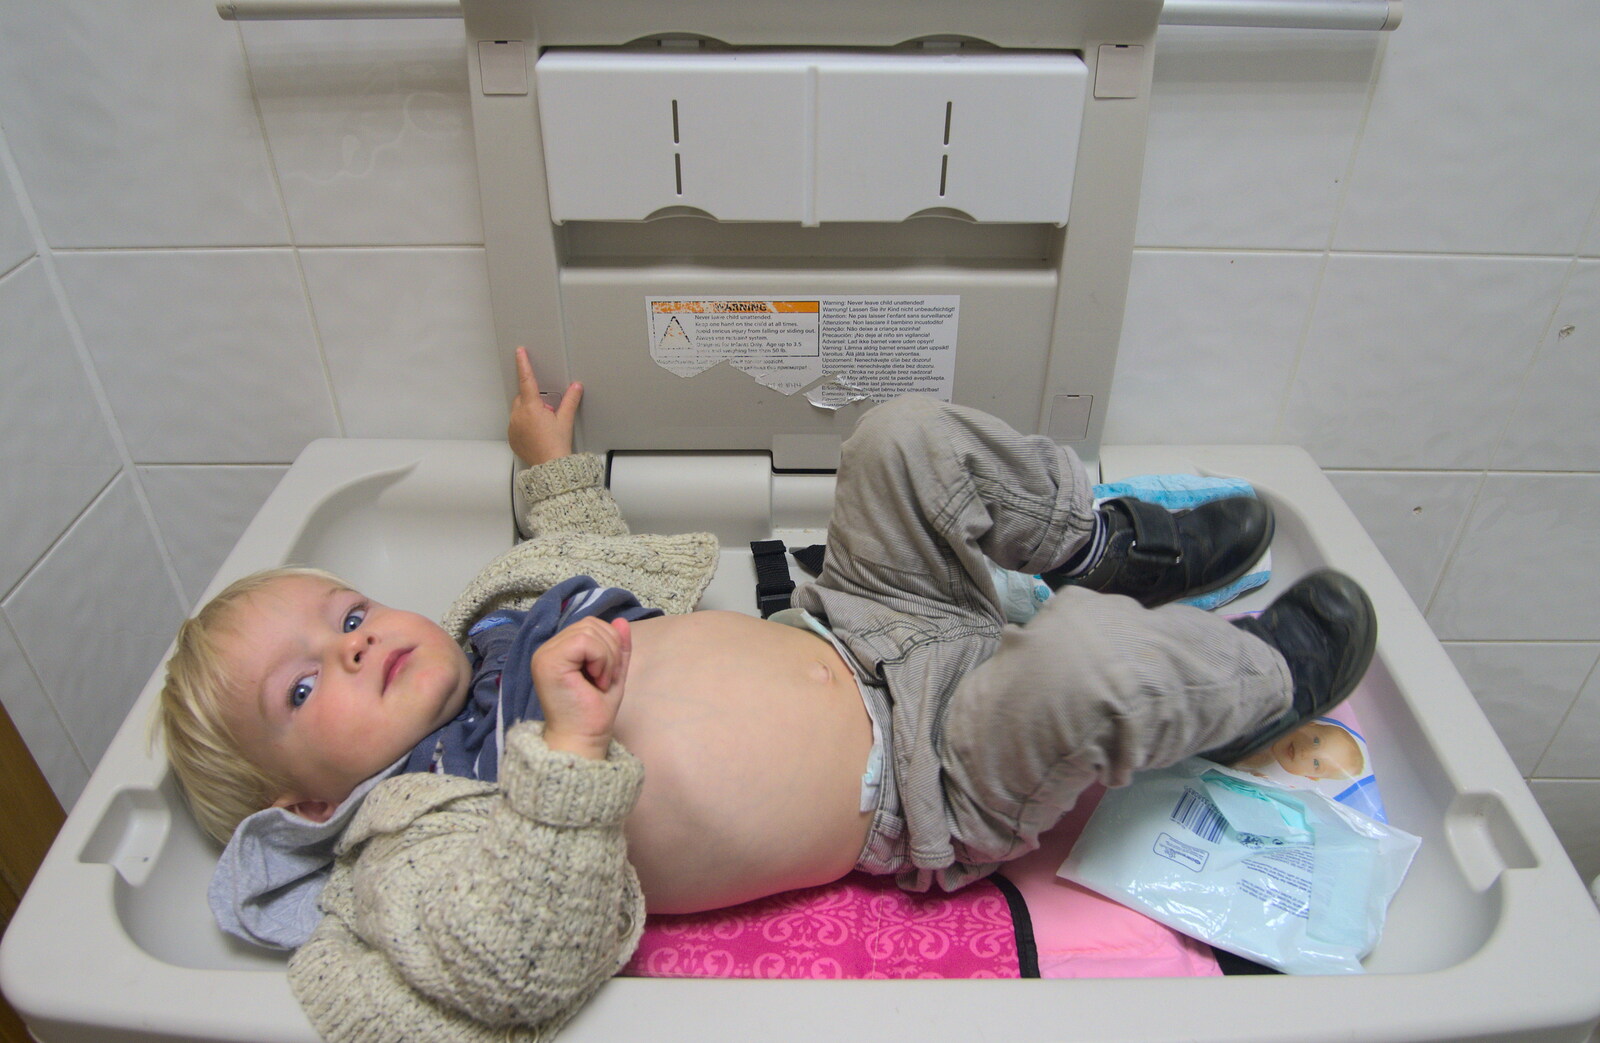 Harry wriggles on a changing table from A Few Days in Spreyton, Devon - 26th October 2013